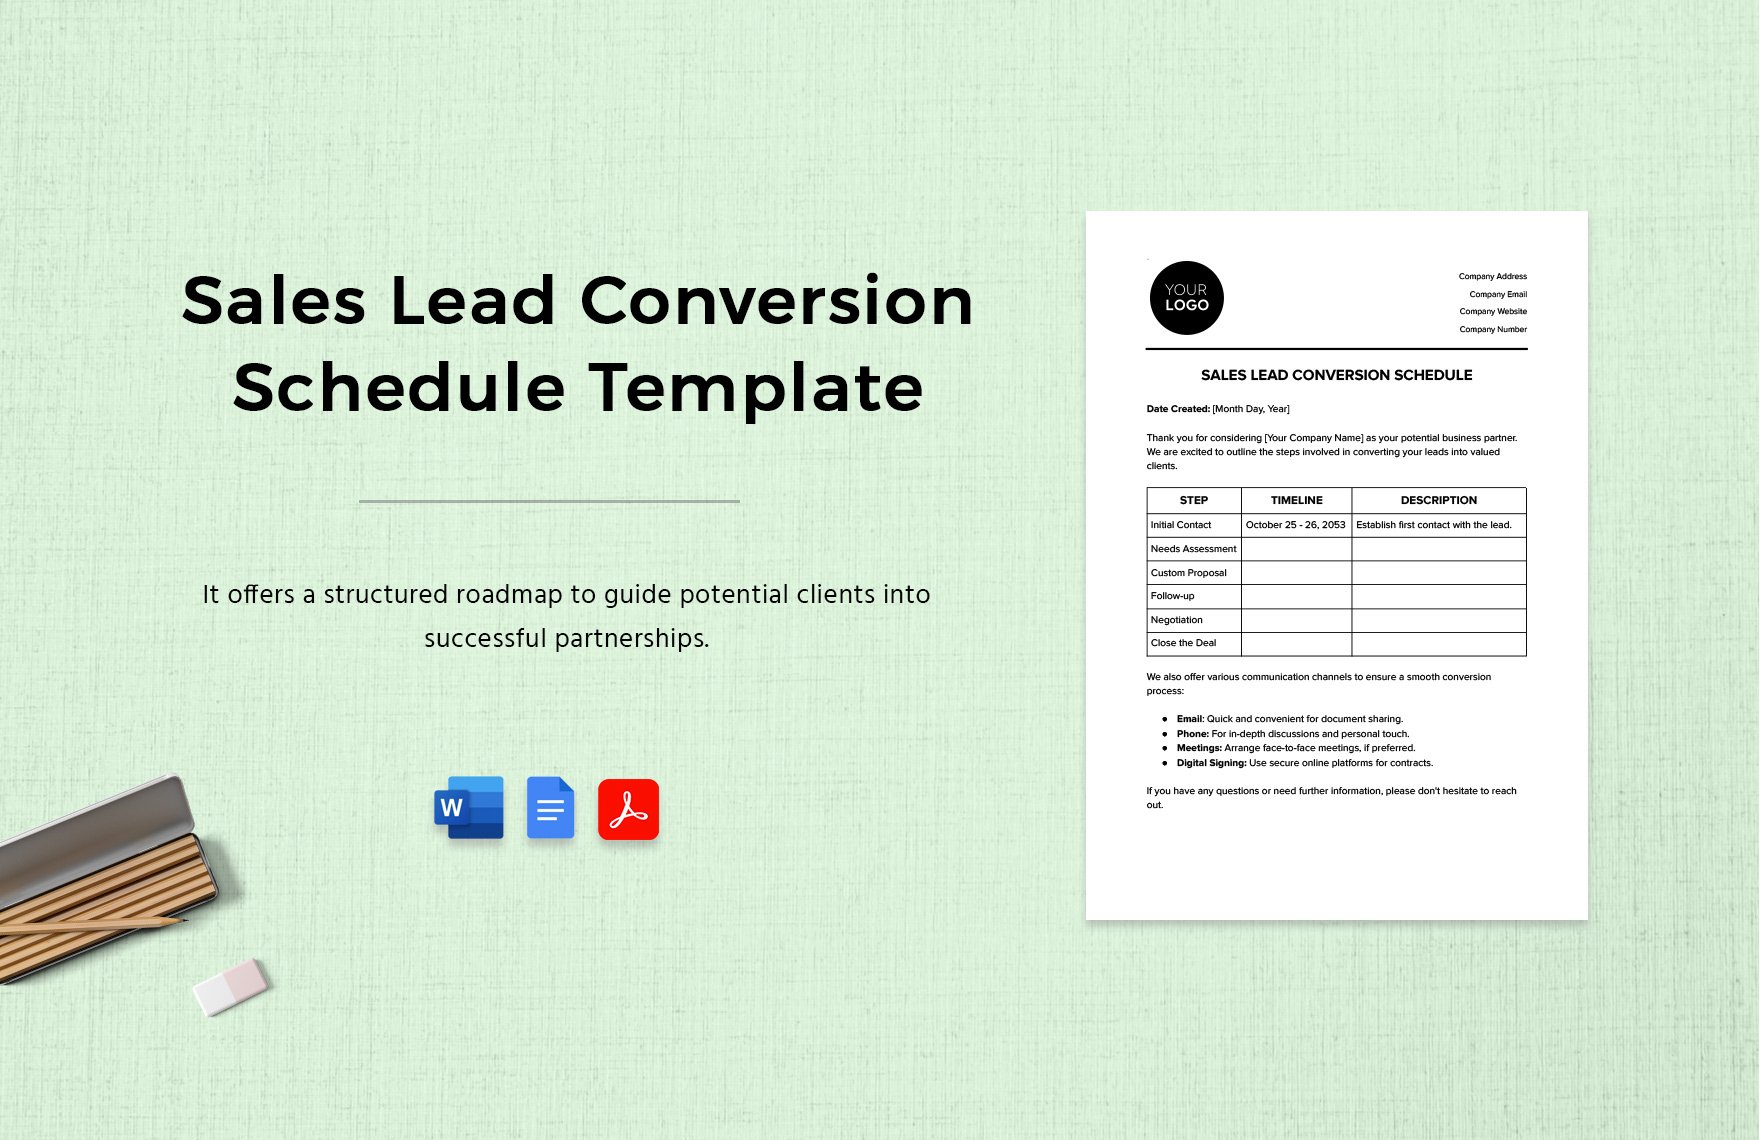 Sales Lead Conversion Schedule Template in Word, Google Docs, PDF